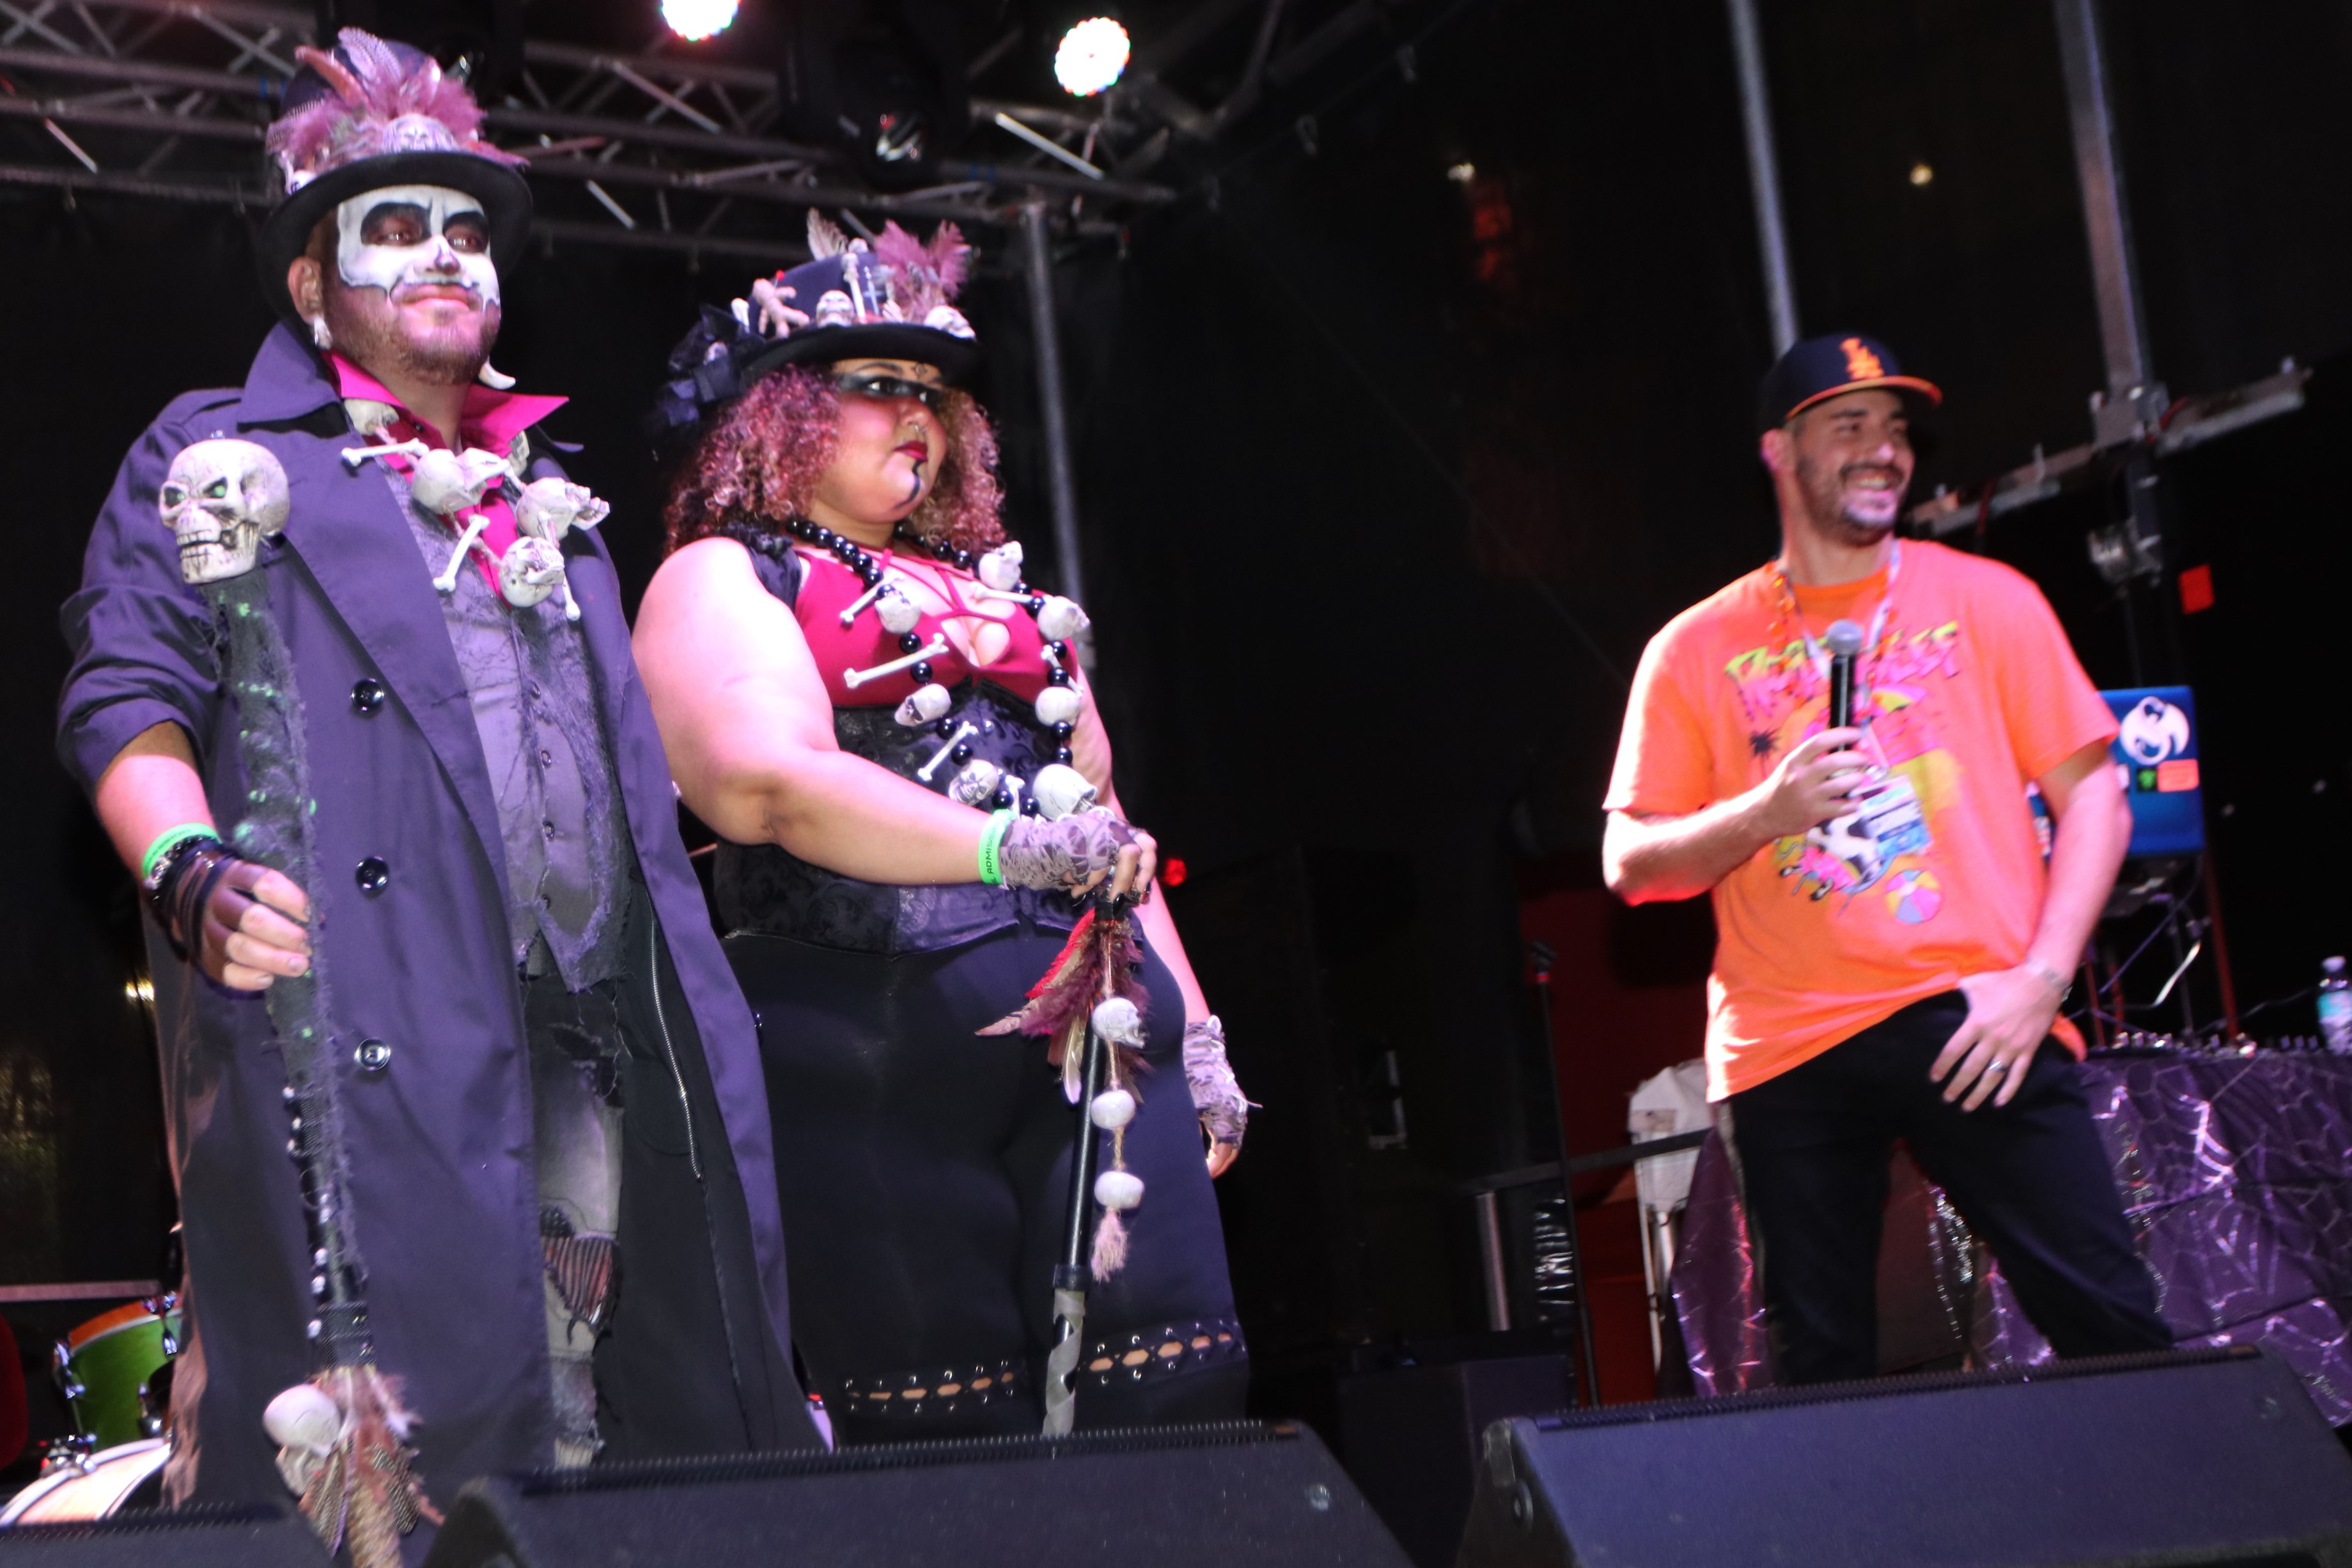 Halloweeners at Moonfest 2019 Costume Contest (photo by: Mike Jalches)